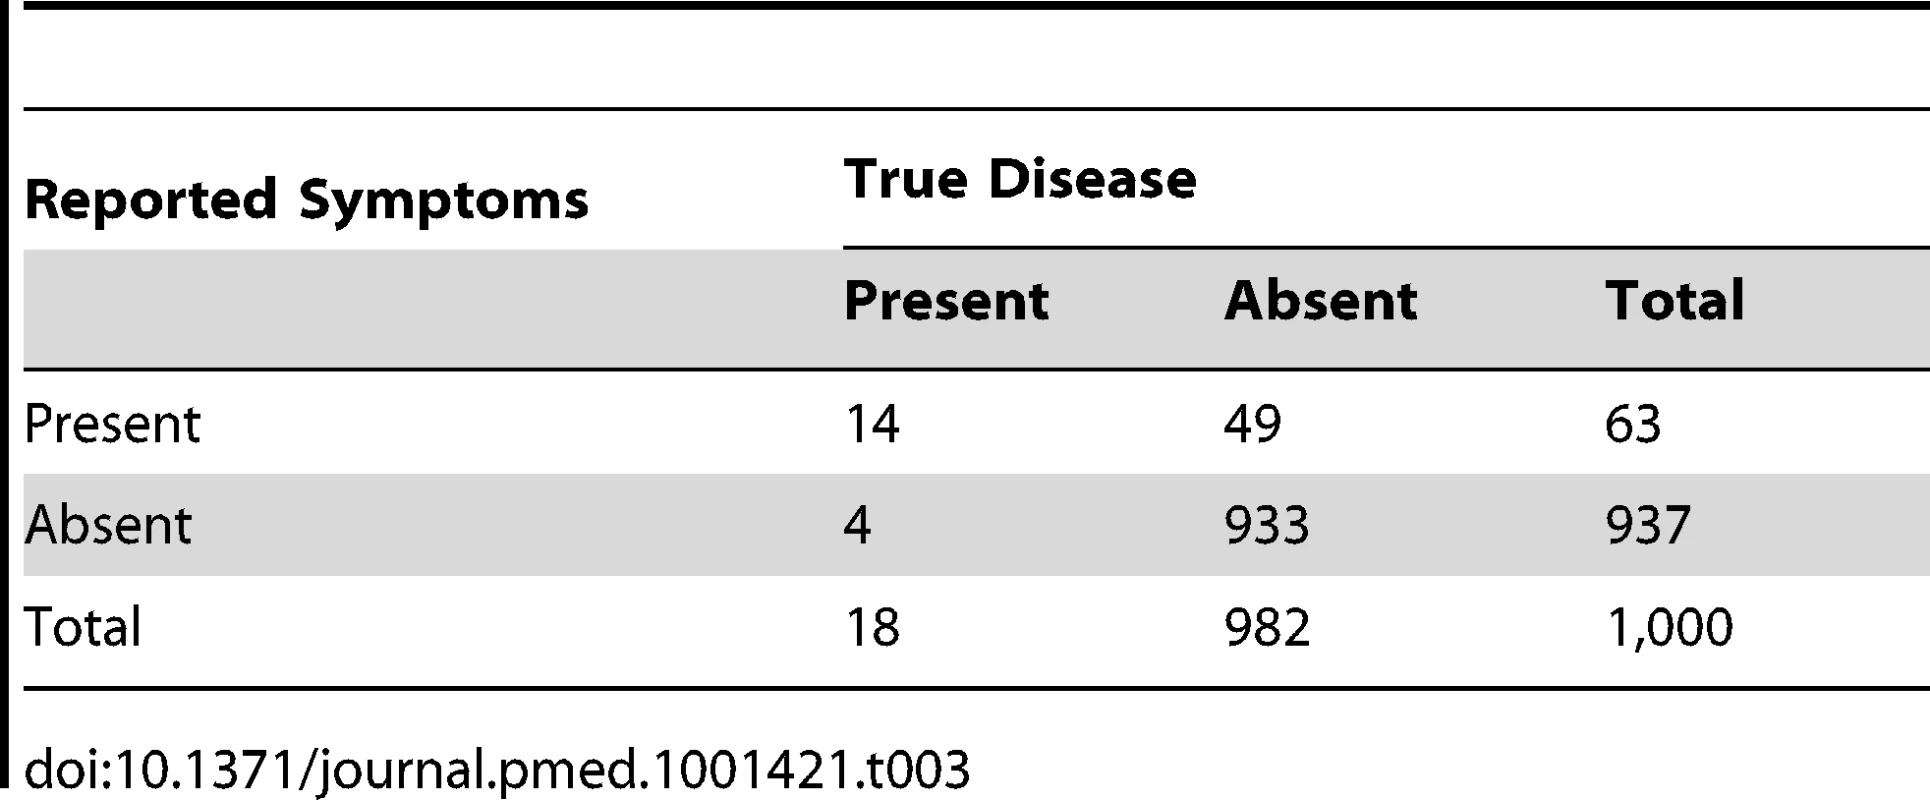 Distribution of cases of “true pneumonia” according to caregiver report of “suspected pneumonia” (test) and true disease status when test sensitivity is 80% and specificity is 95%.